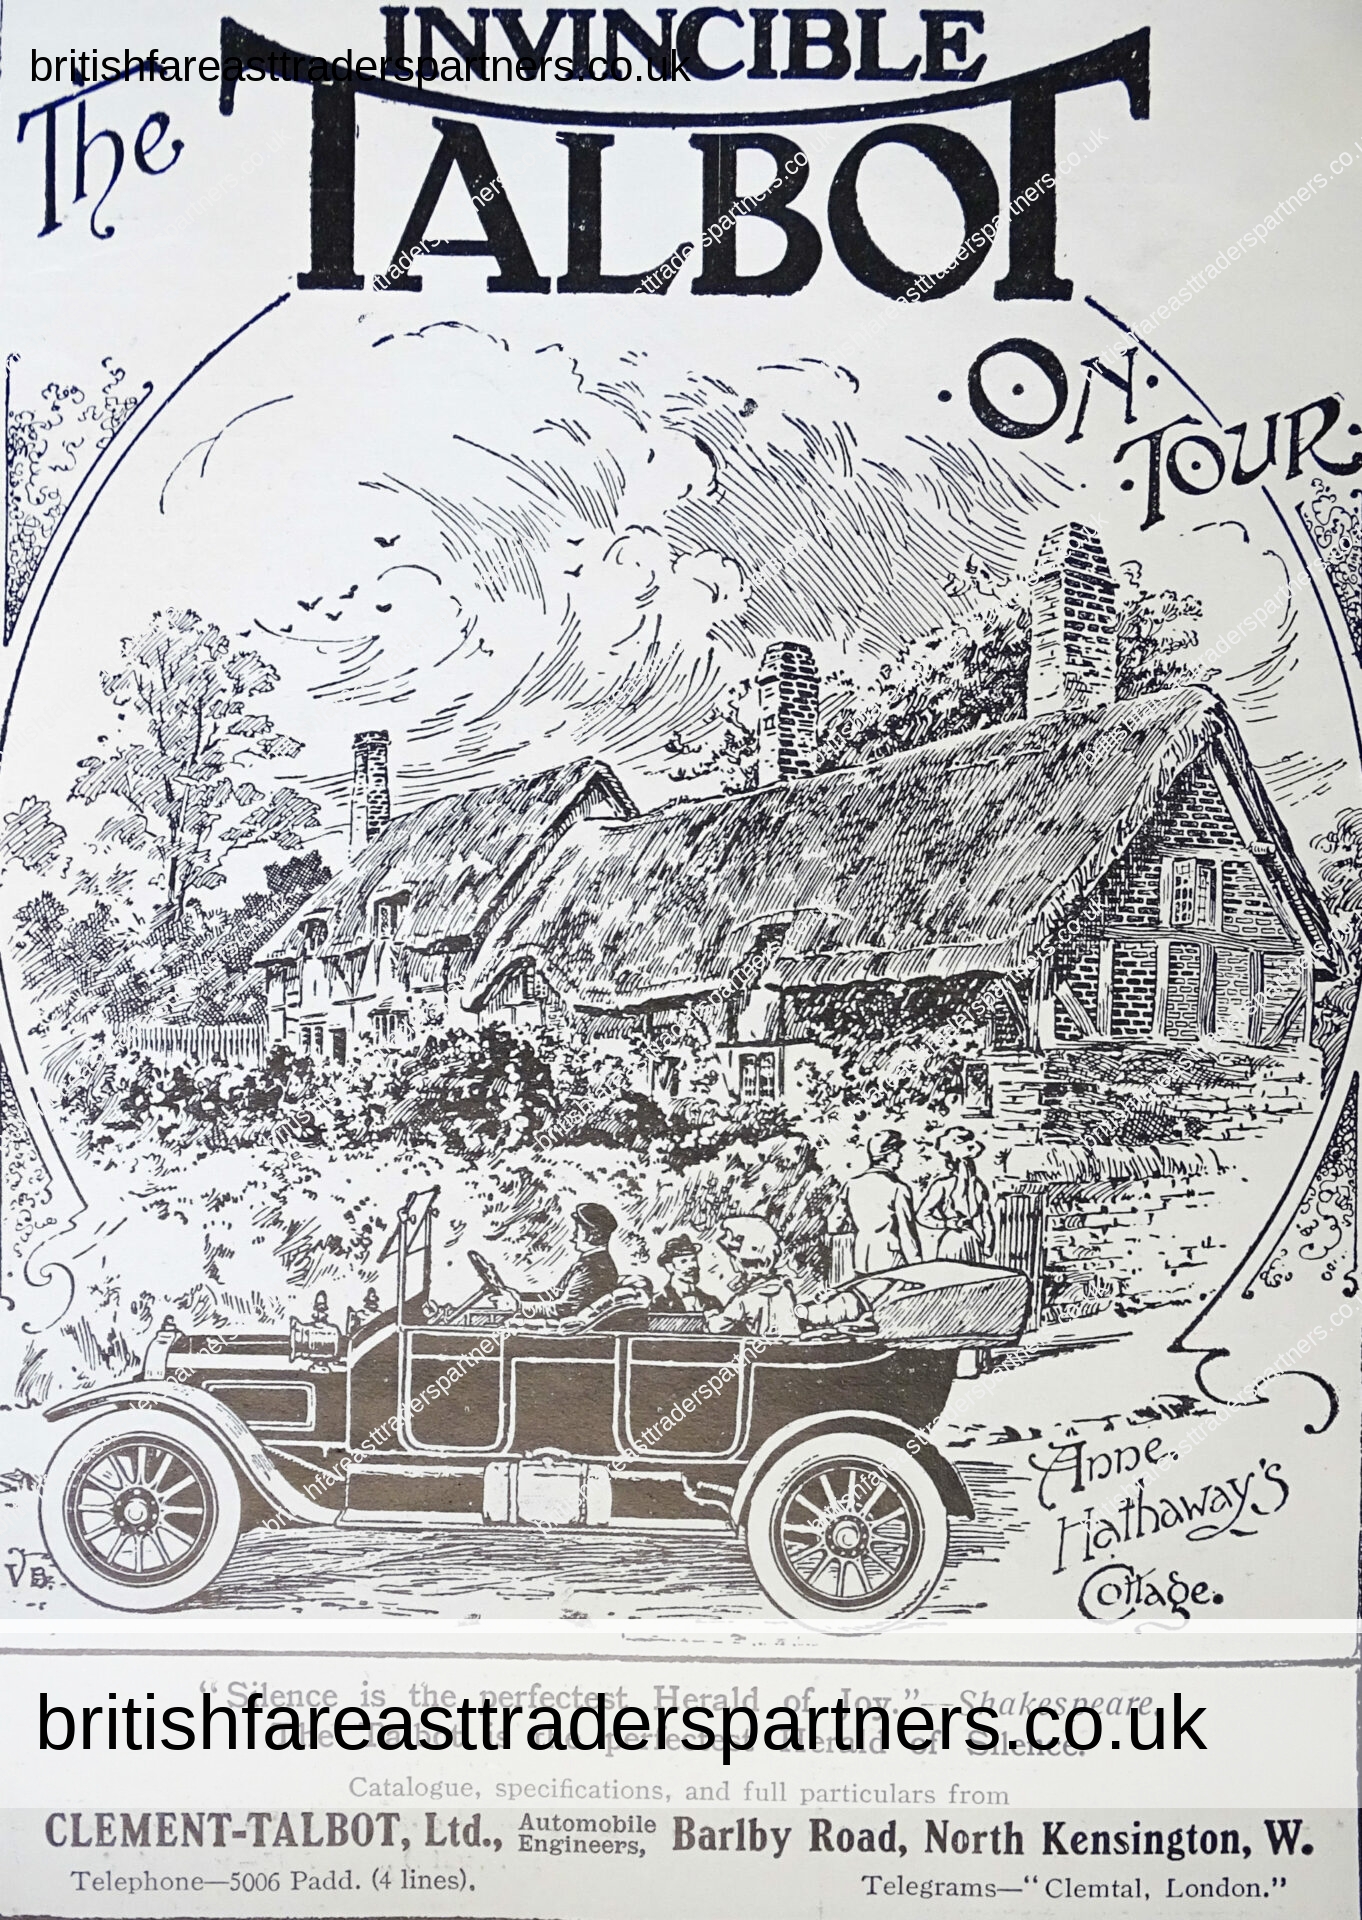 ANTIQUE 1st JULY 1911 The INVINCIBLE TALBOT on TOUR Anne Hathaway’s COTTAGE Clement-Talbot Ltd The SPHERE Magazine Ad COLLECTABLE TRANSPORT EPHEMERA ADVERTISEMENT